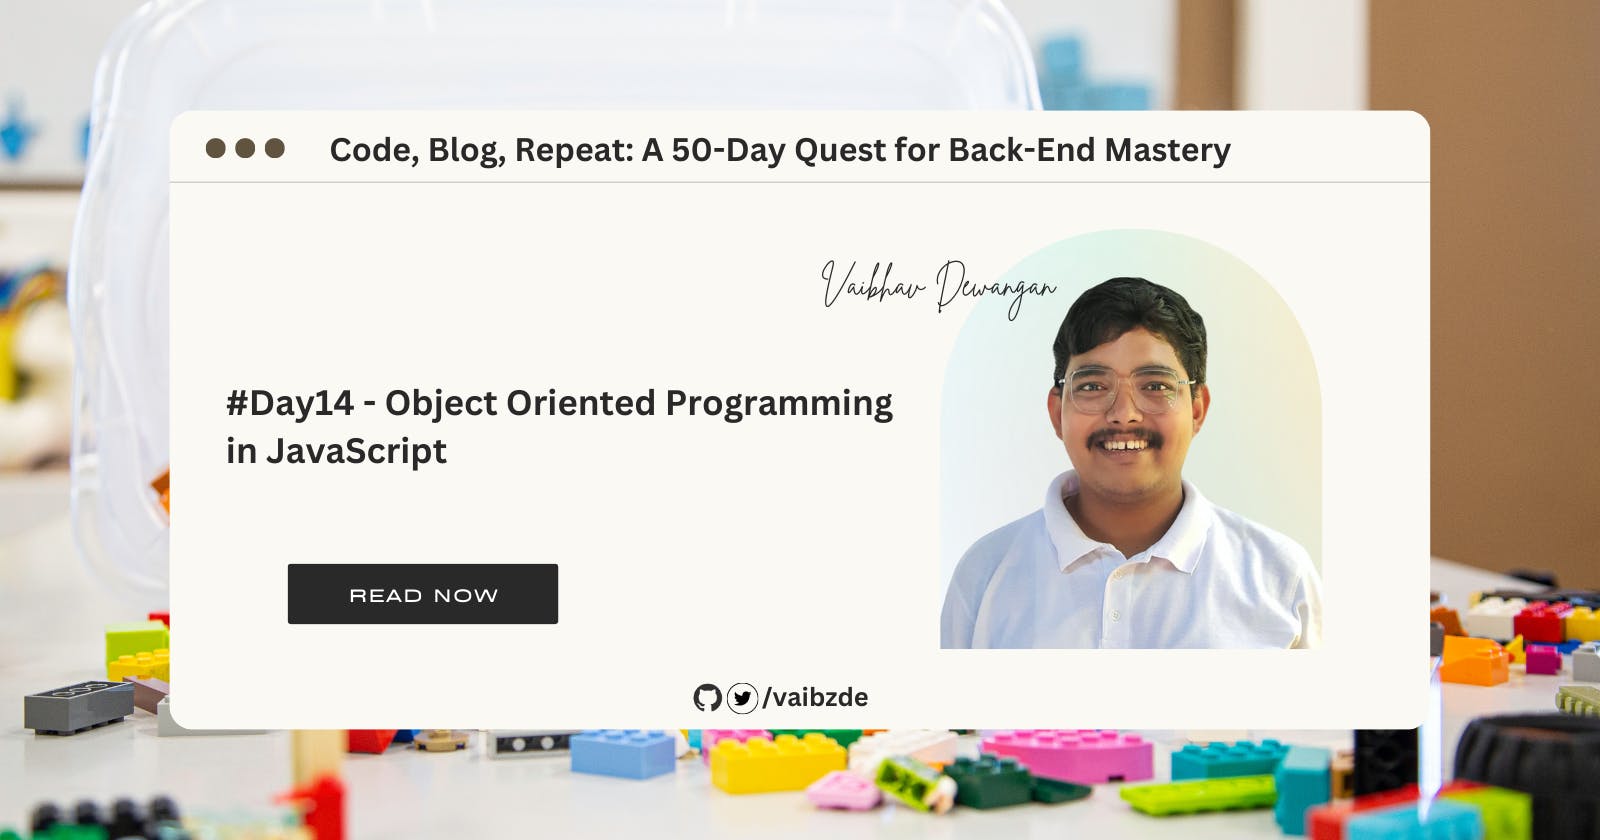 #Day14 - Object-Oriented Programming in JavaScript